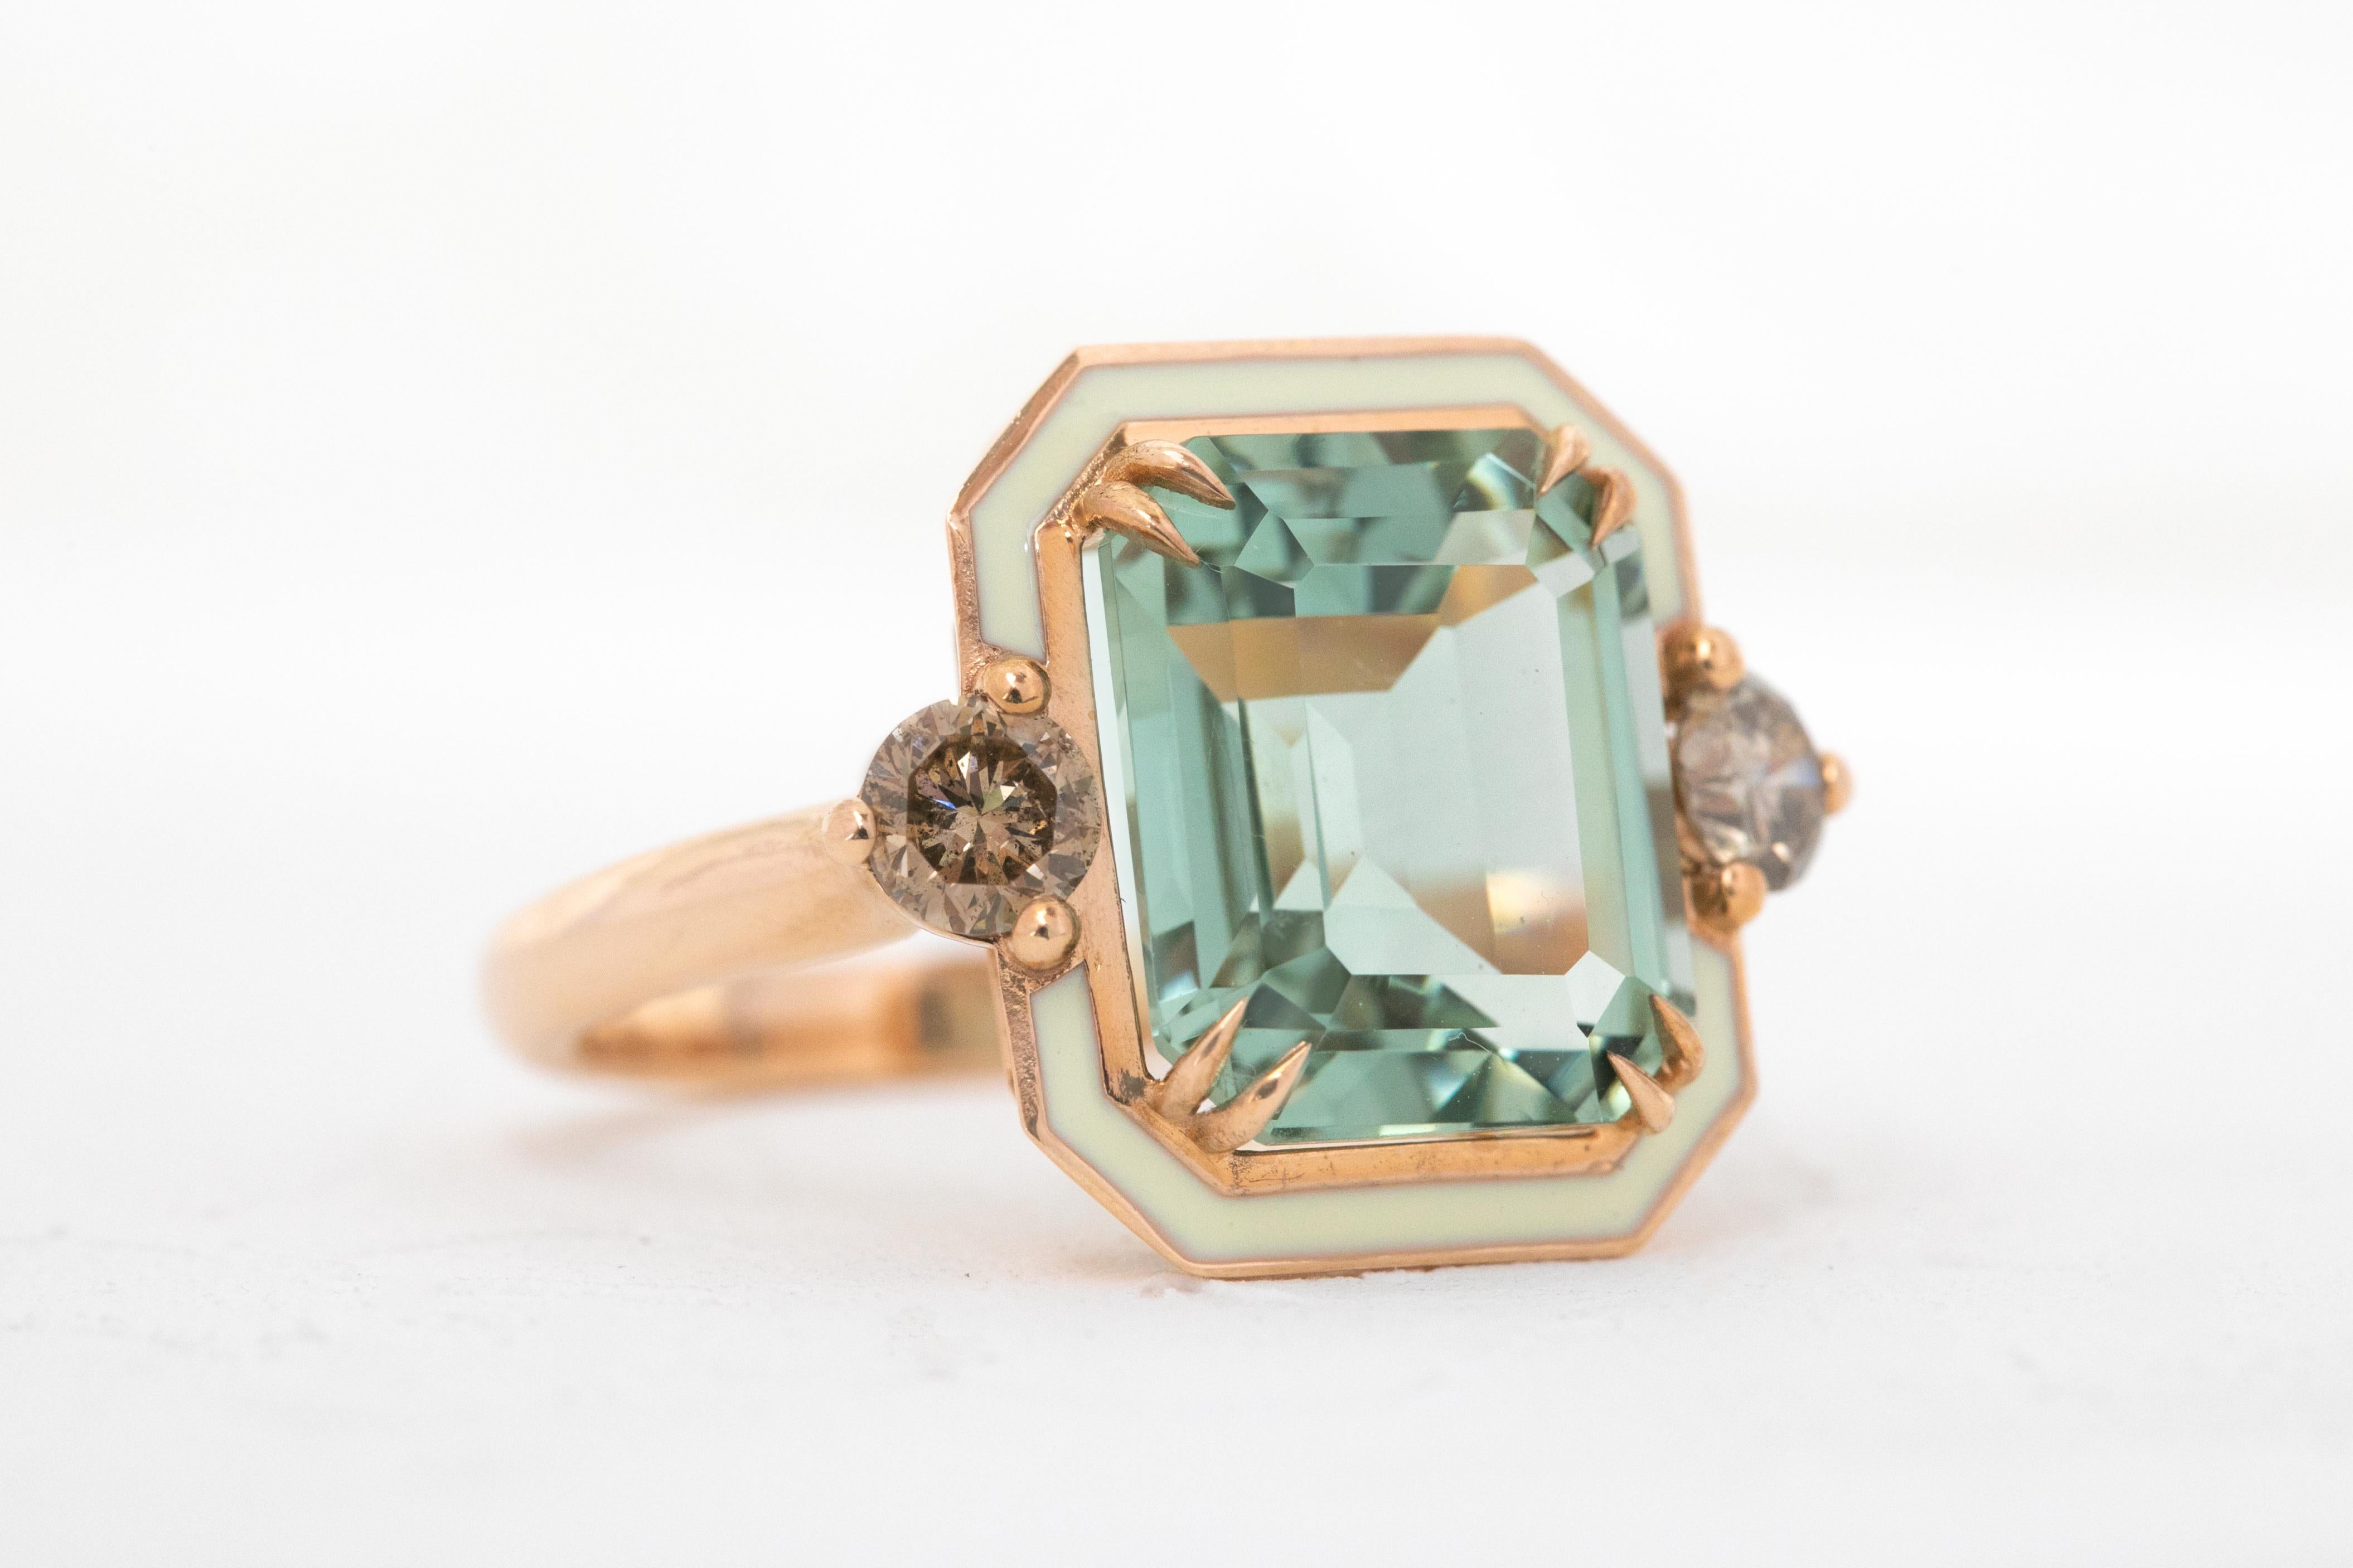 For Sale:  14k Gold Art Deco Ring, 5.67ct Green Amethyst Ring and 0.54 Cognac Diamond Ring 2